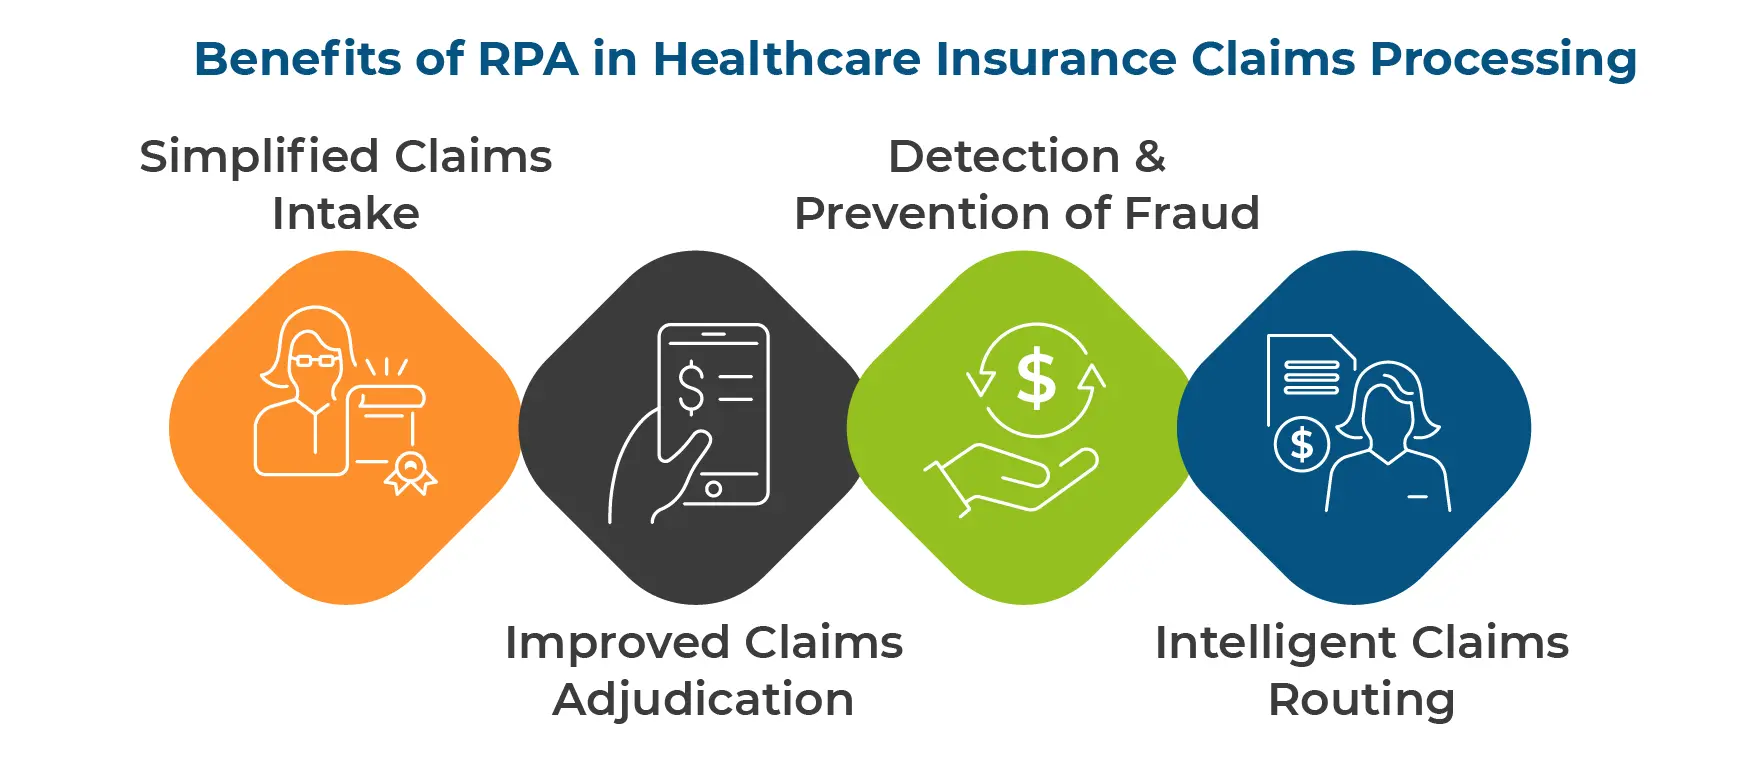 Benefits of RPA in Healthcare Insurance Claims Processing